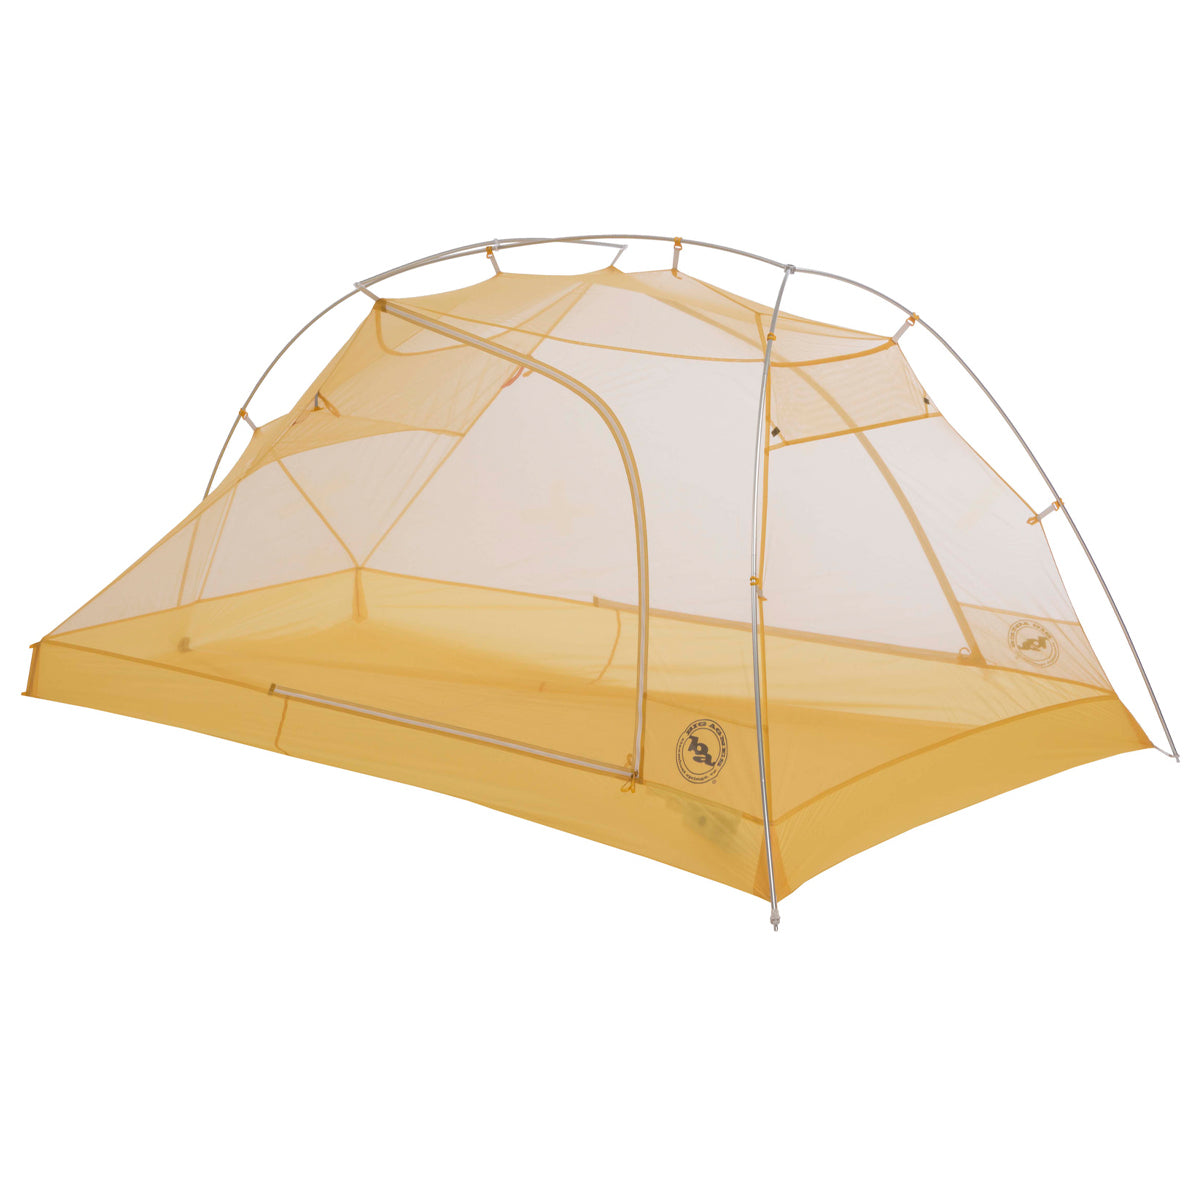 Big Agnes Tiger Wall UL 2 Person Solution Dye Tent in  by GOHUNT | Big Agnes - GOHUNT Shop